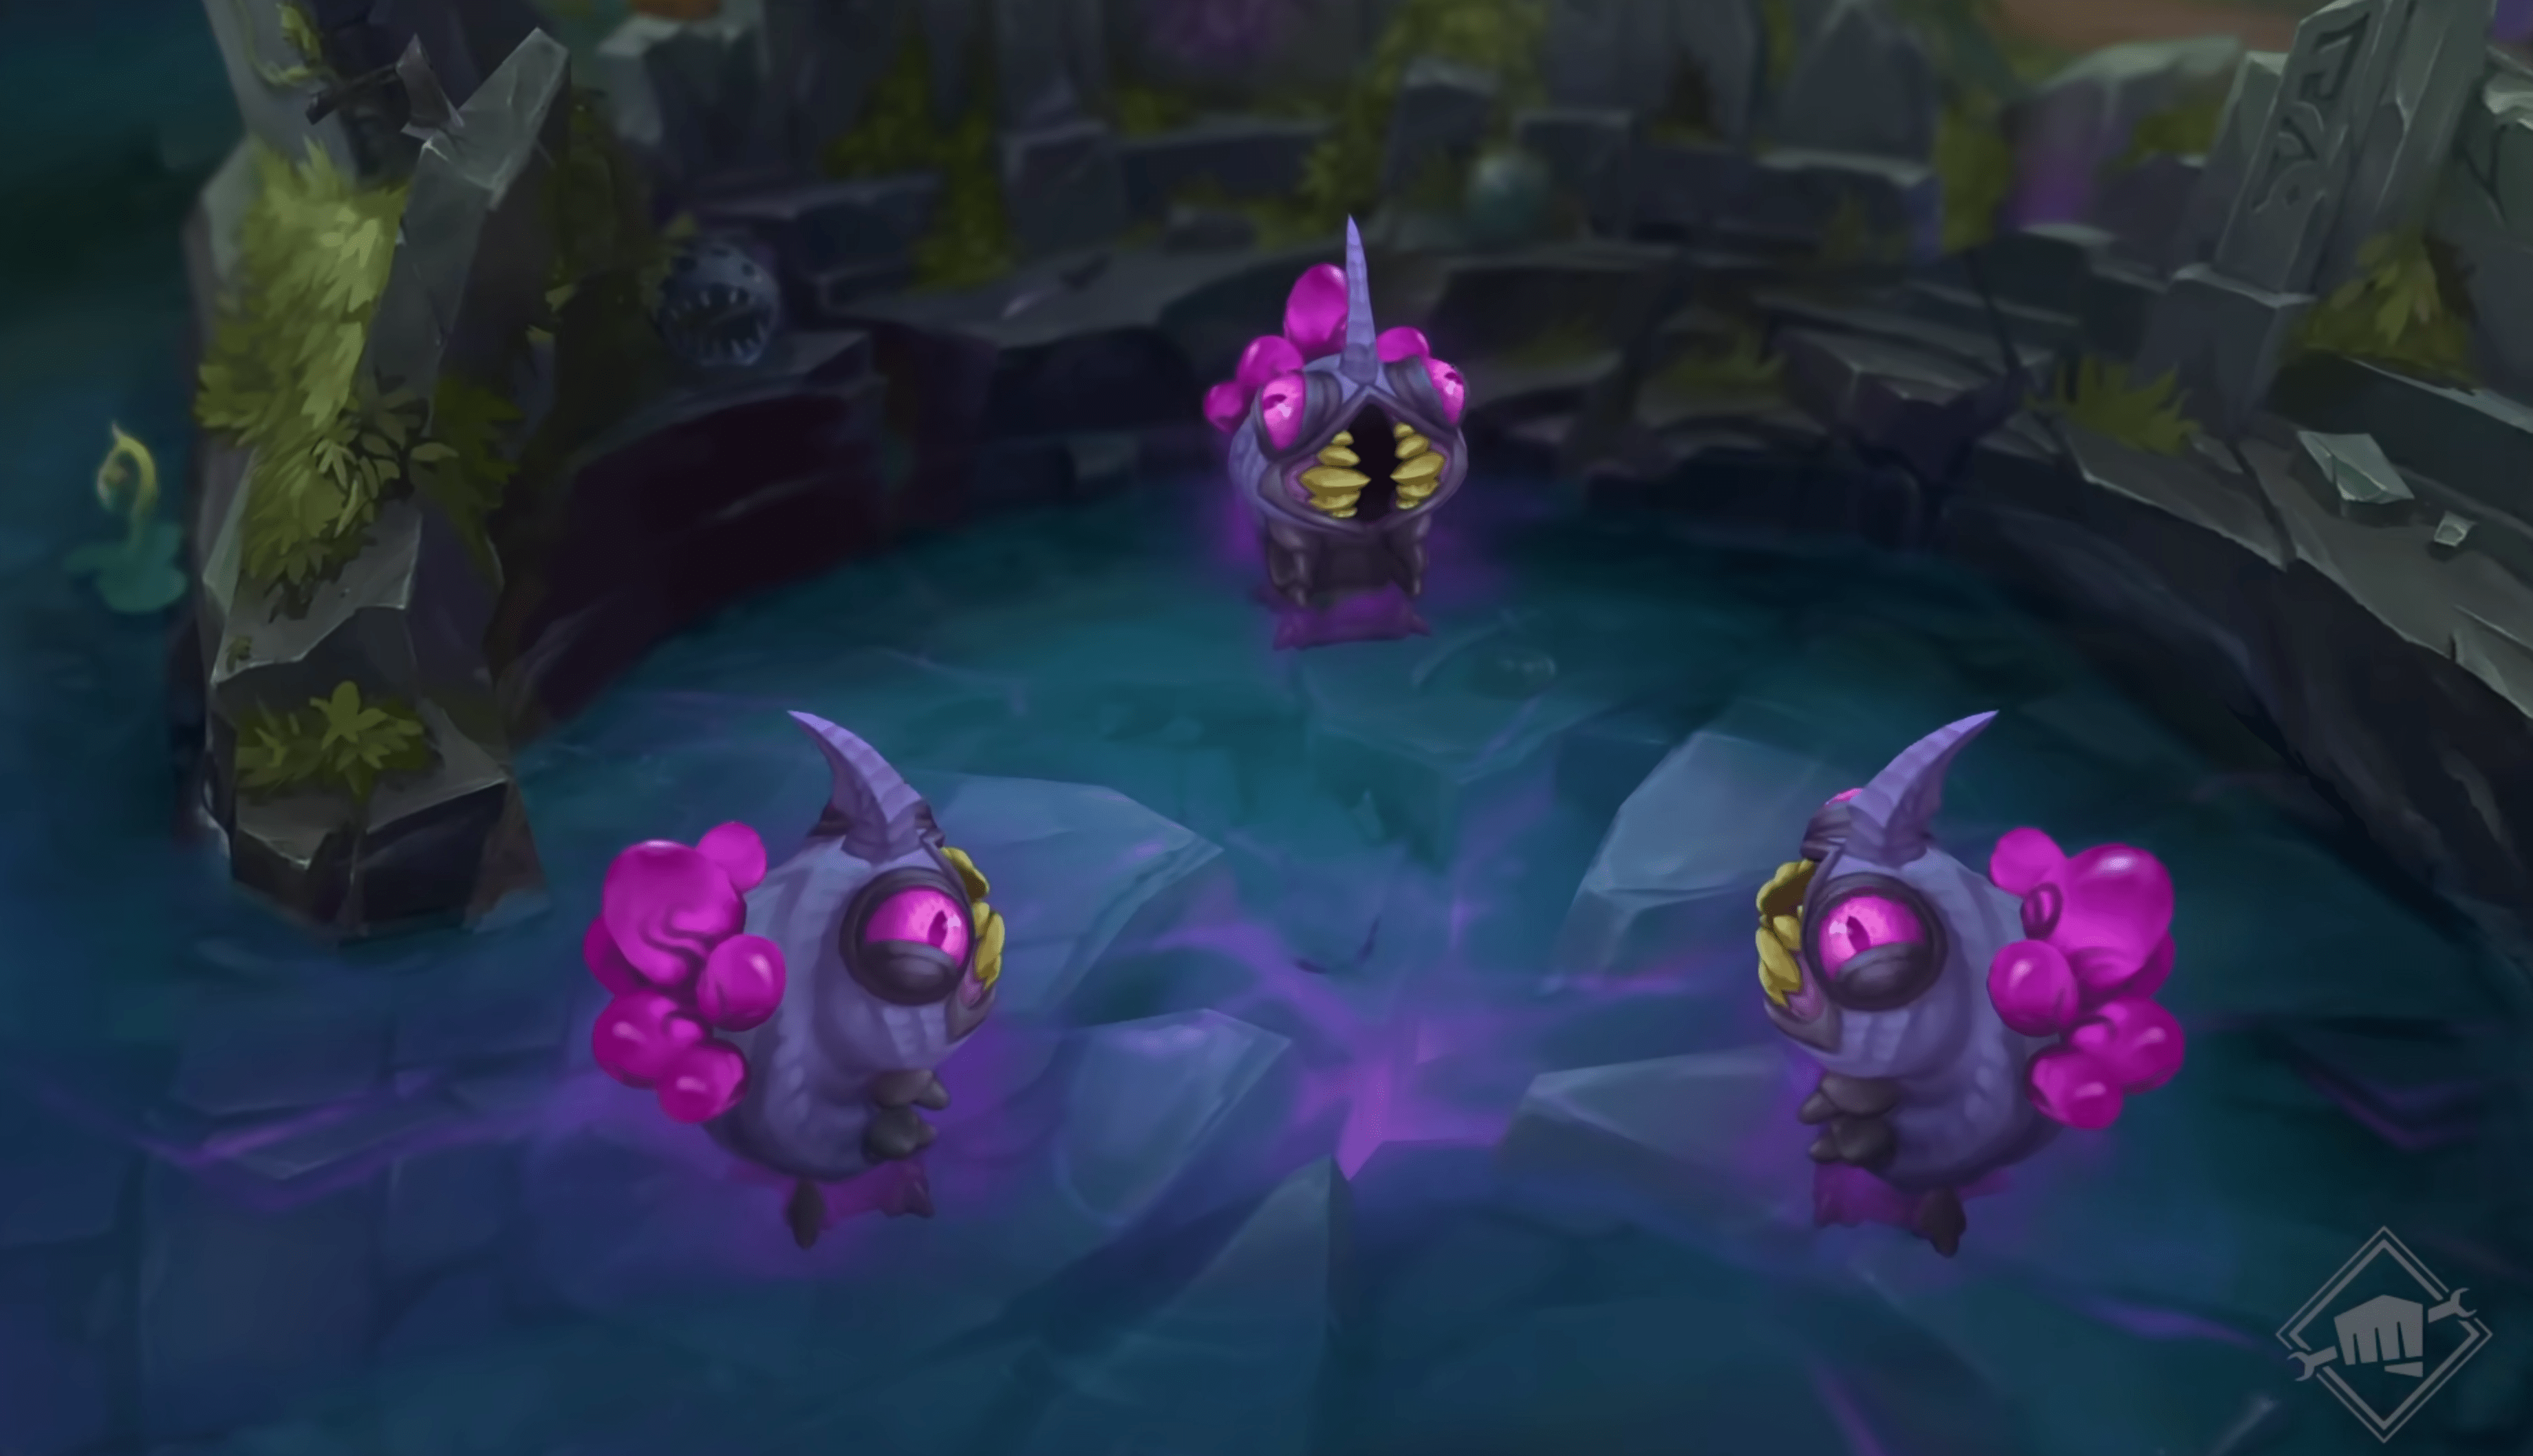 League of Legends players give a hilariously creative name to Voidgrubs